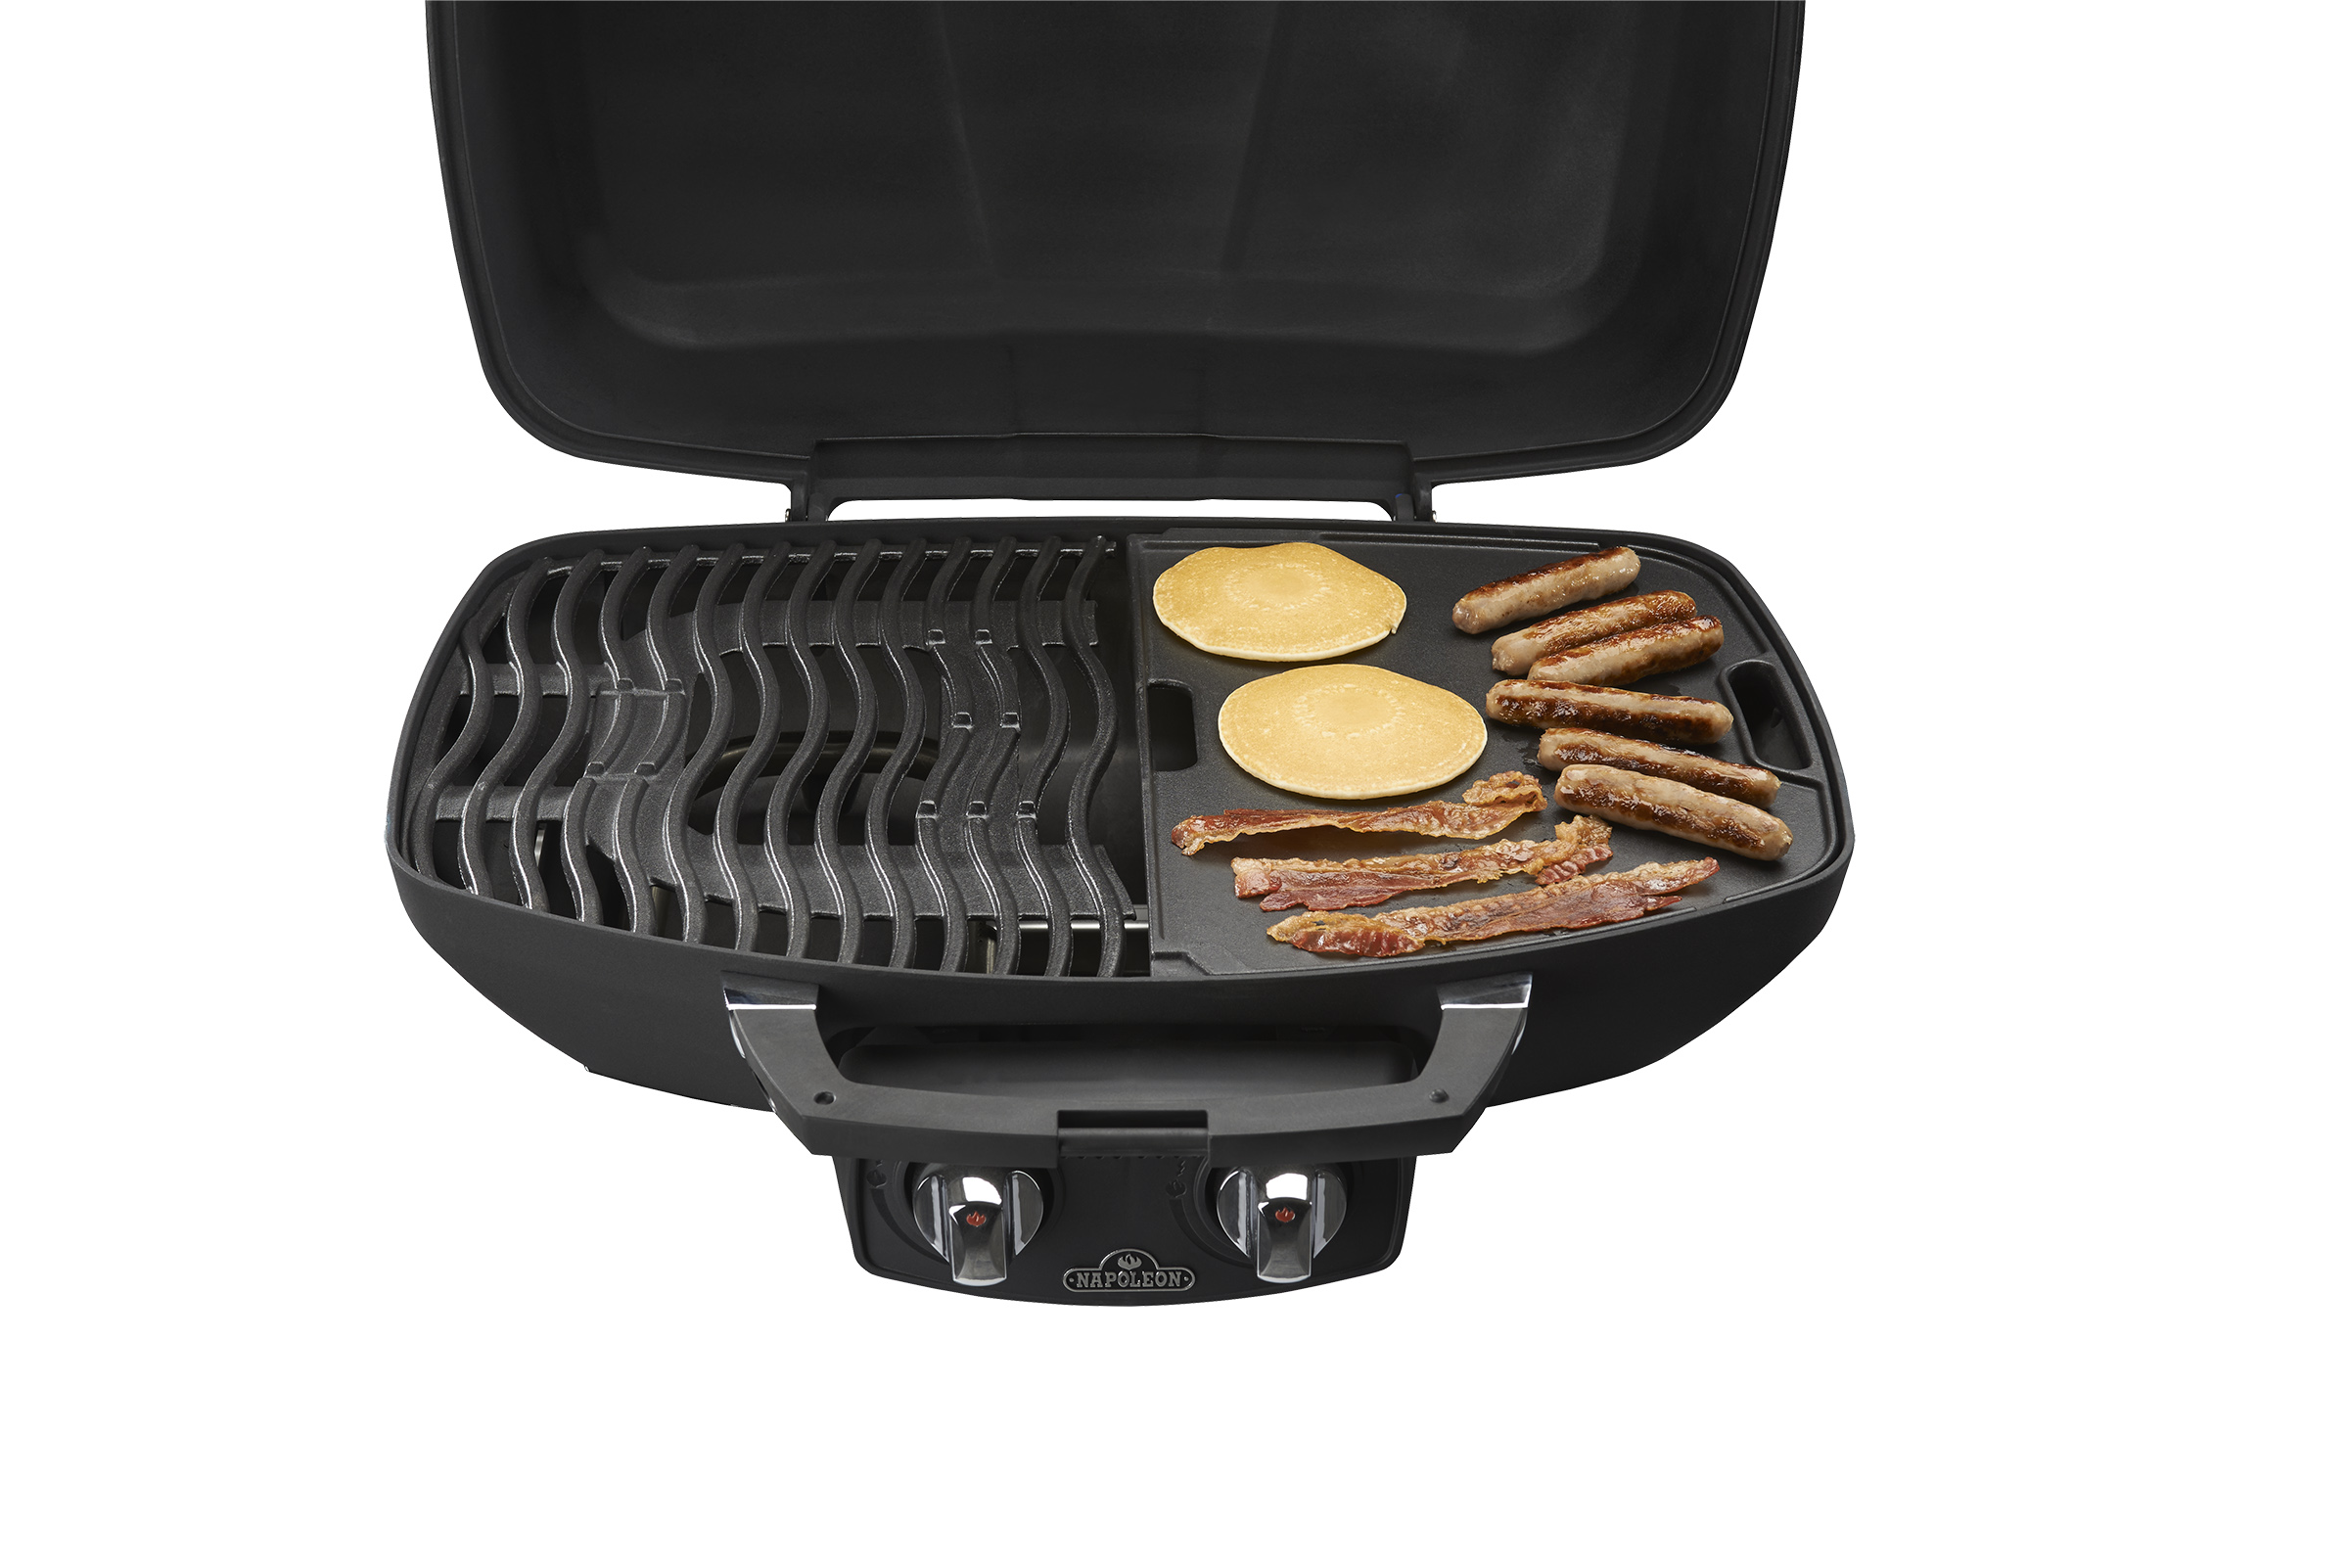 Travel Q flat grill in use